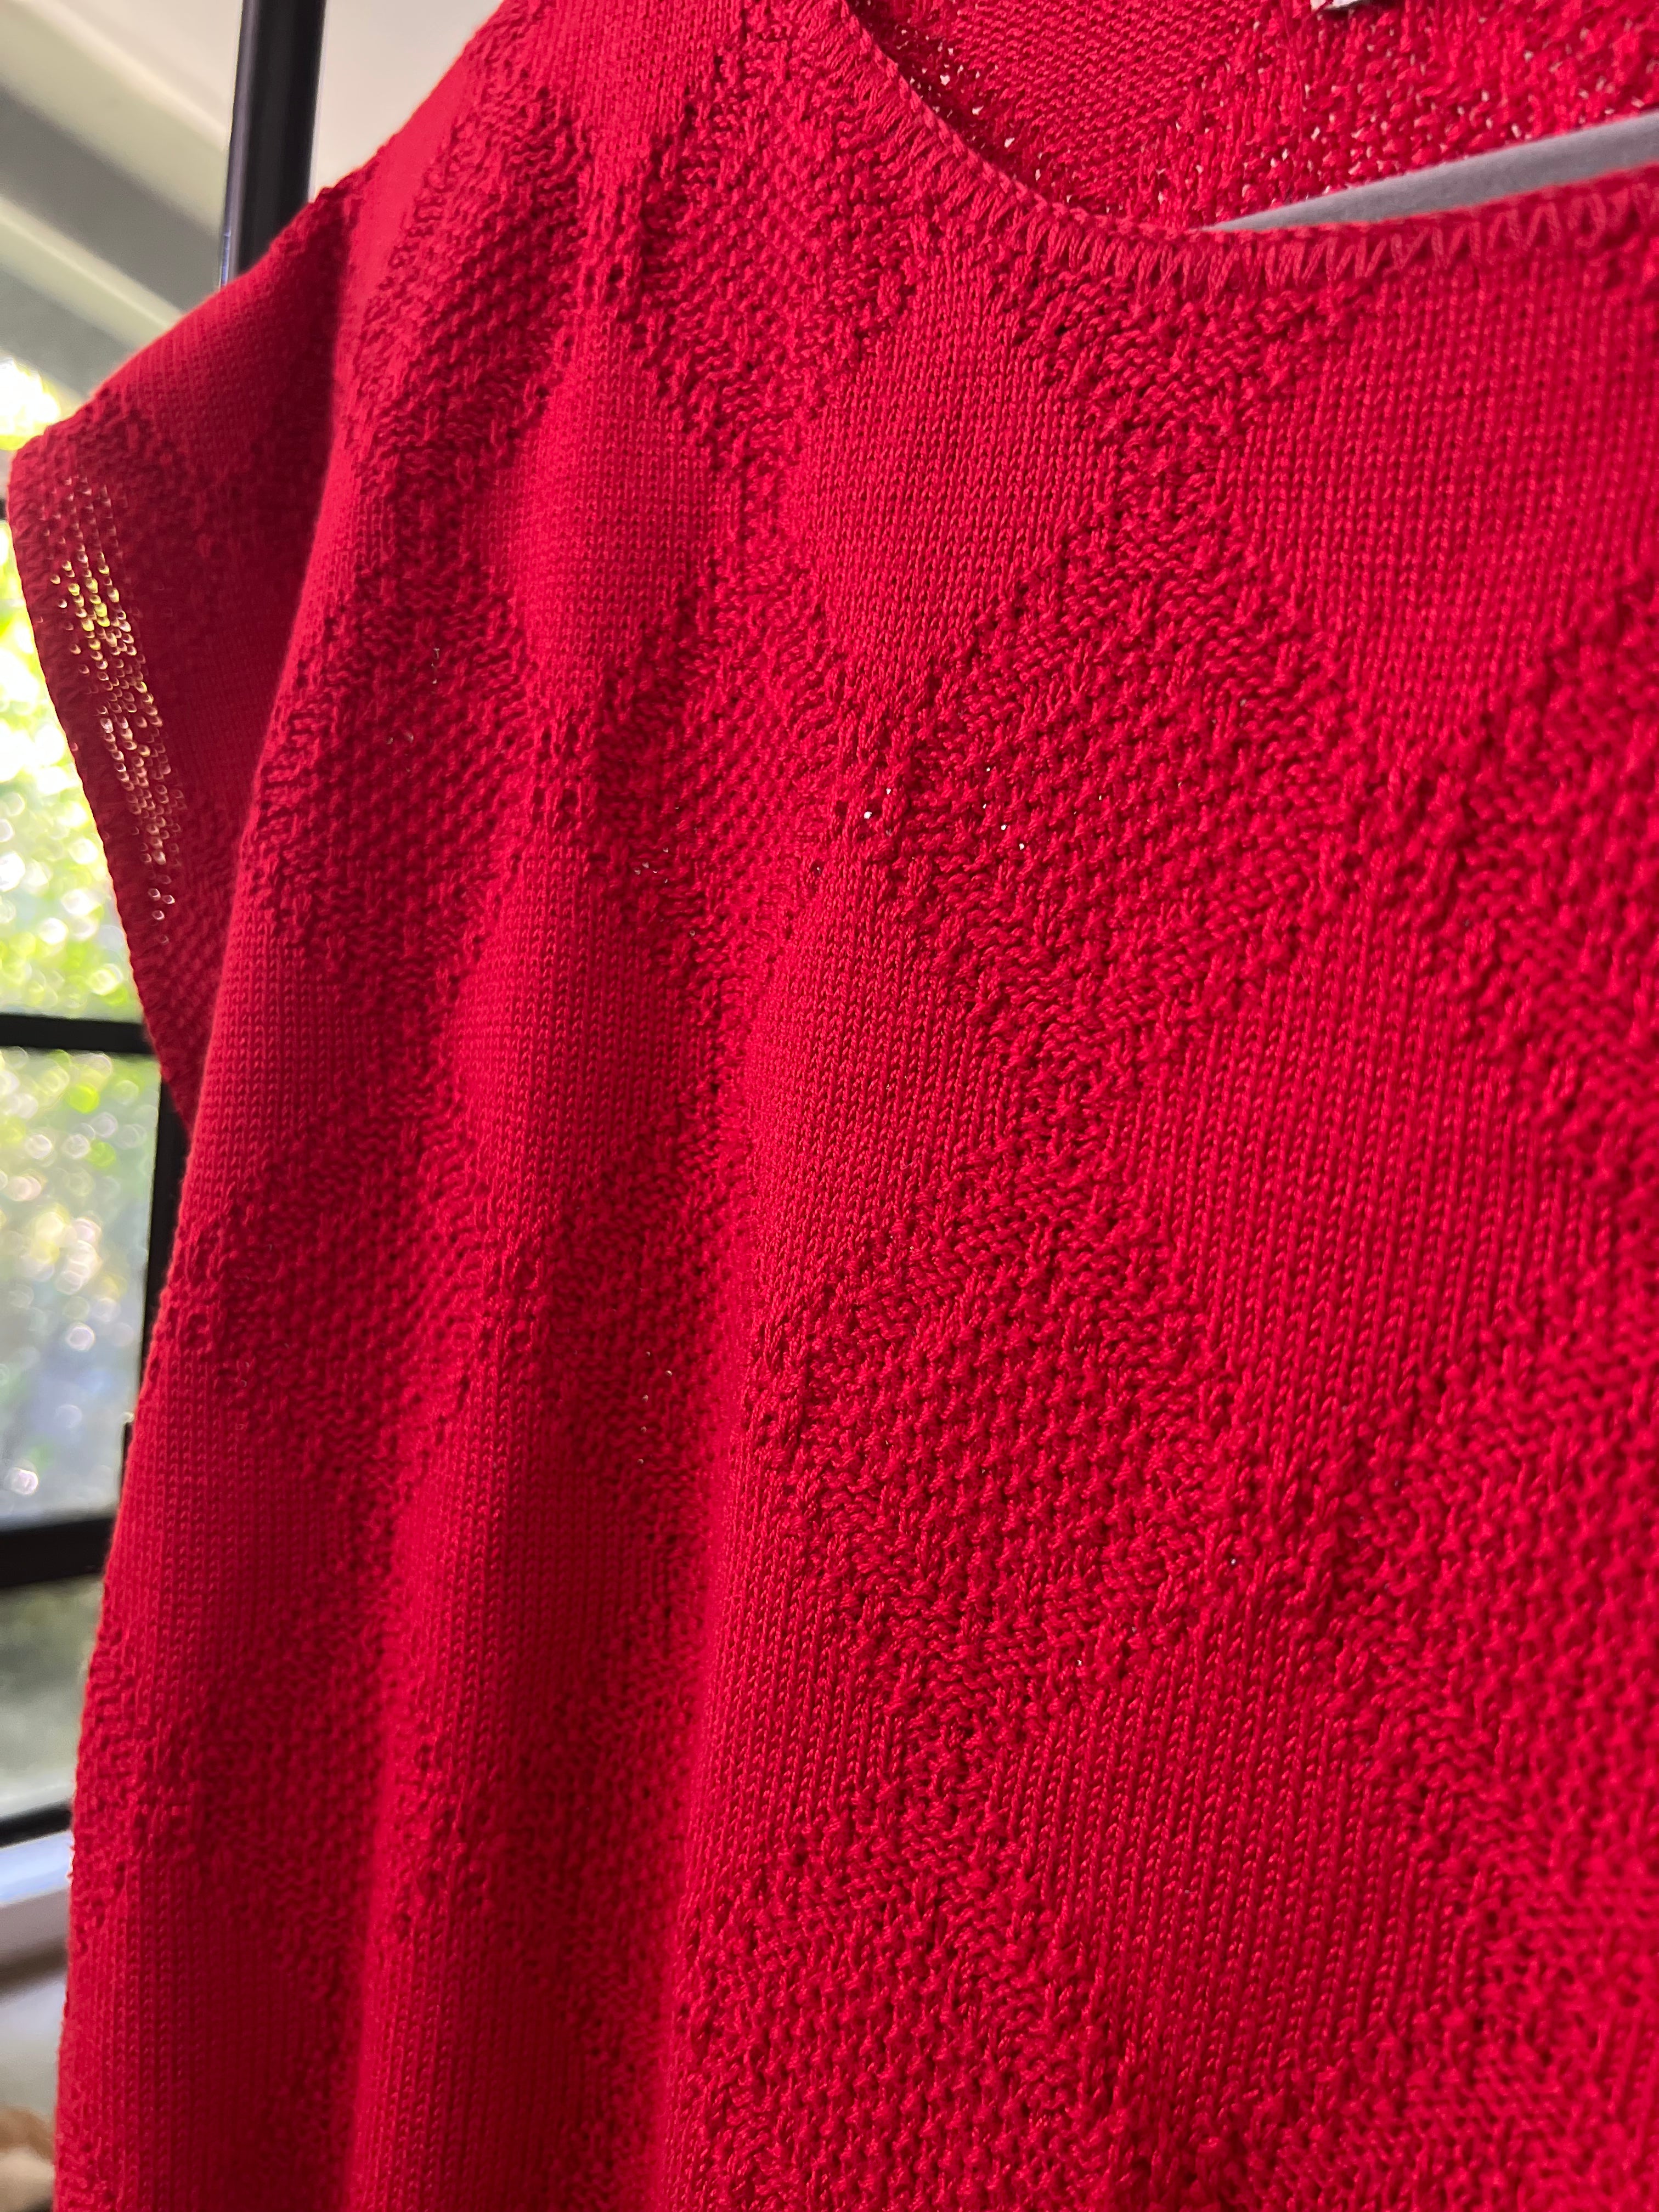 1980's Red Knit Short-sleeve Sweater